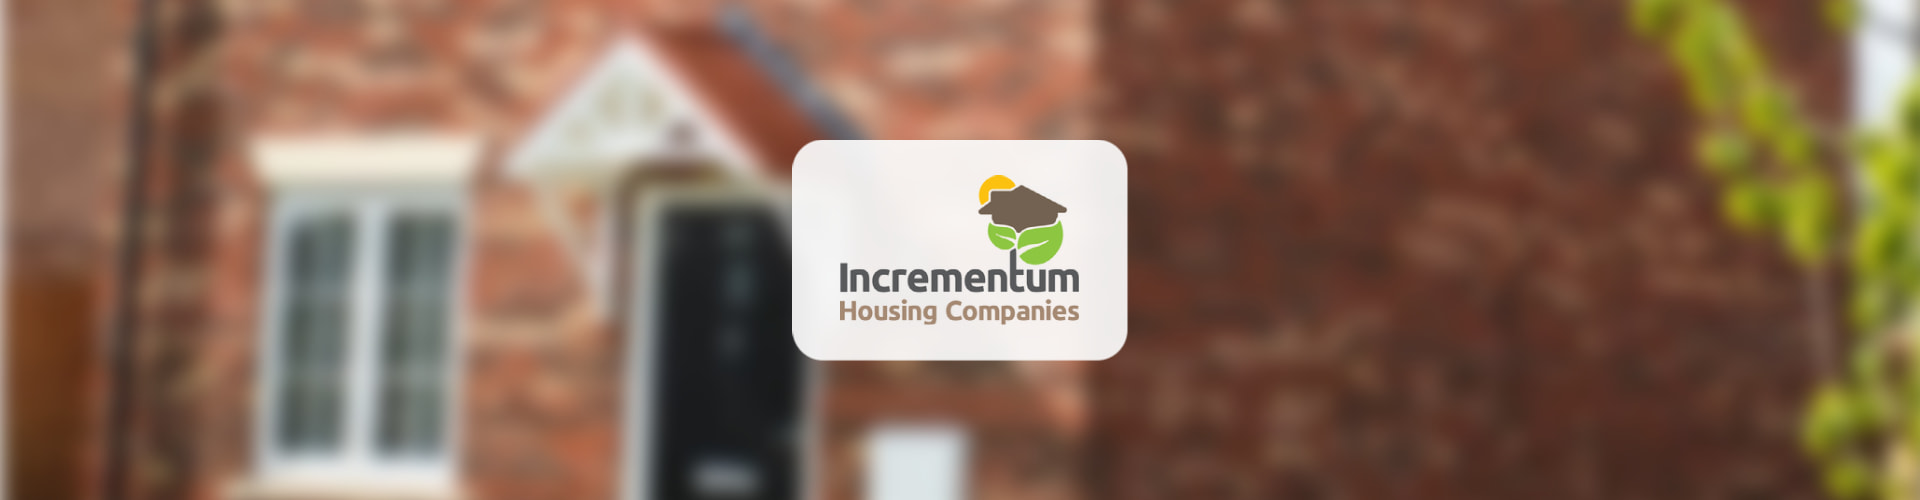 Incrementum Housing logo over a house background